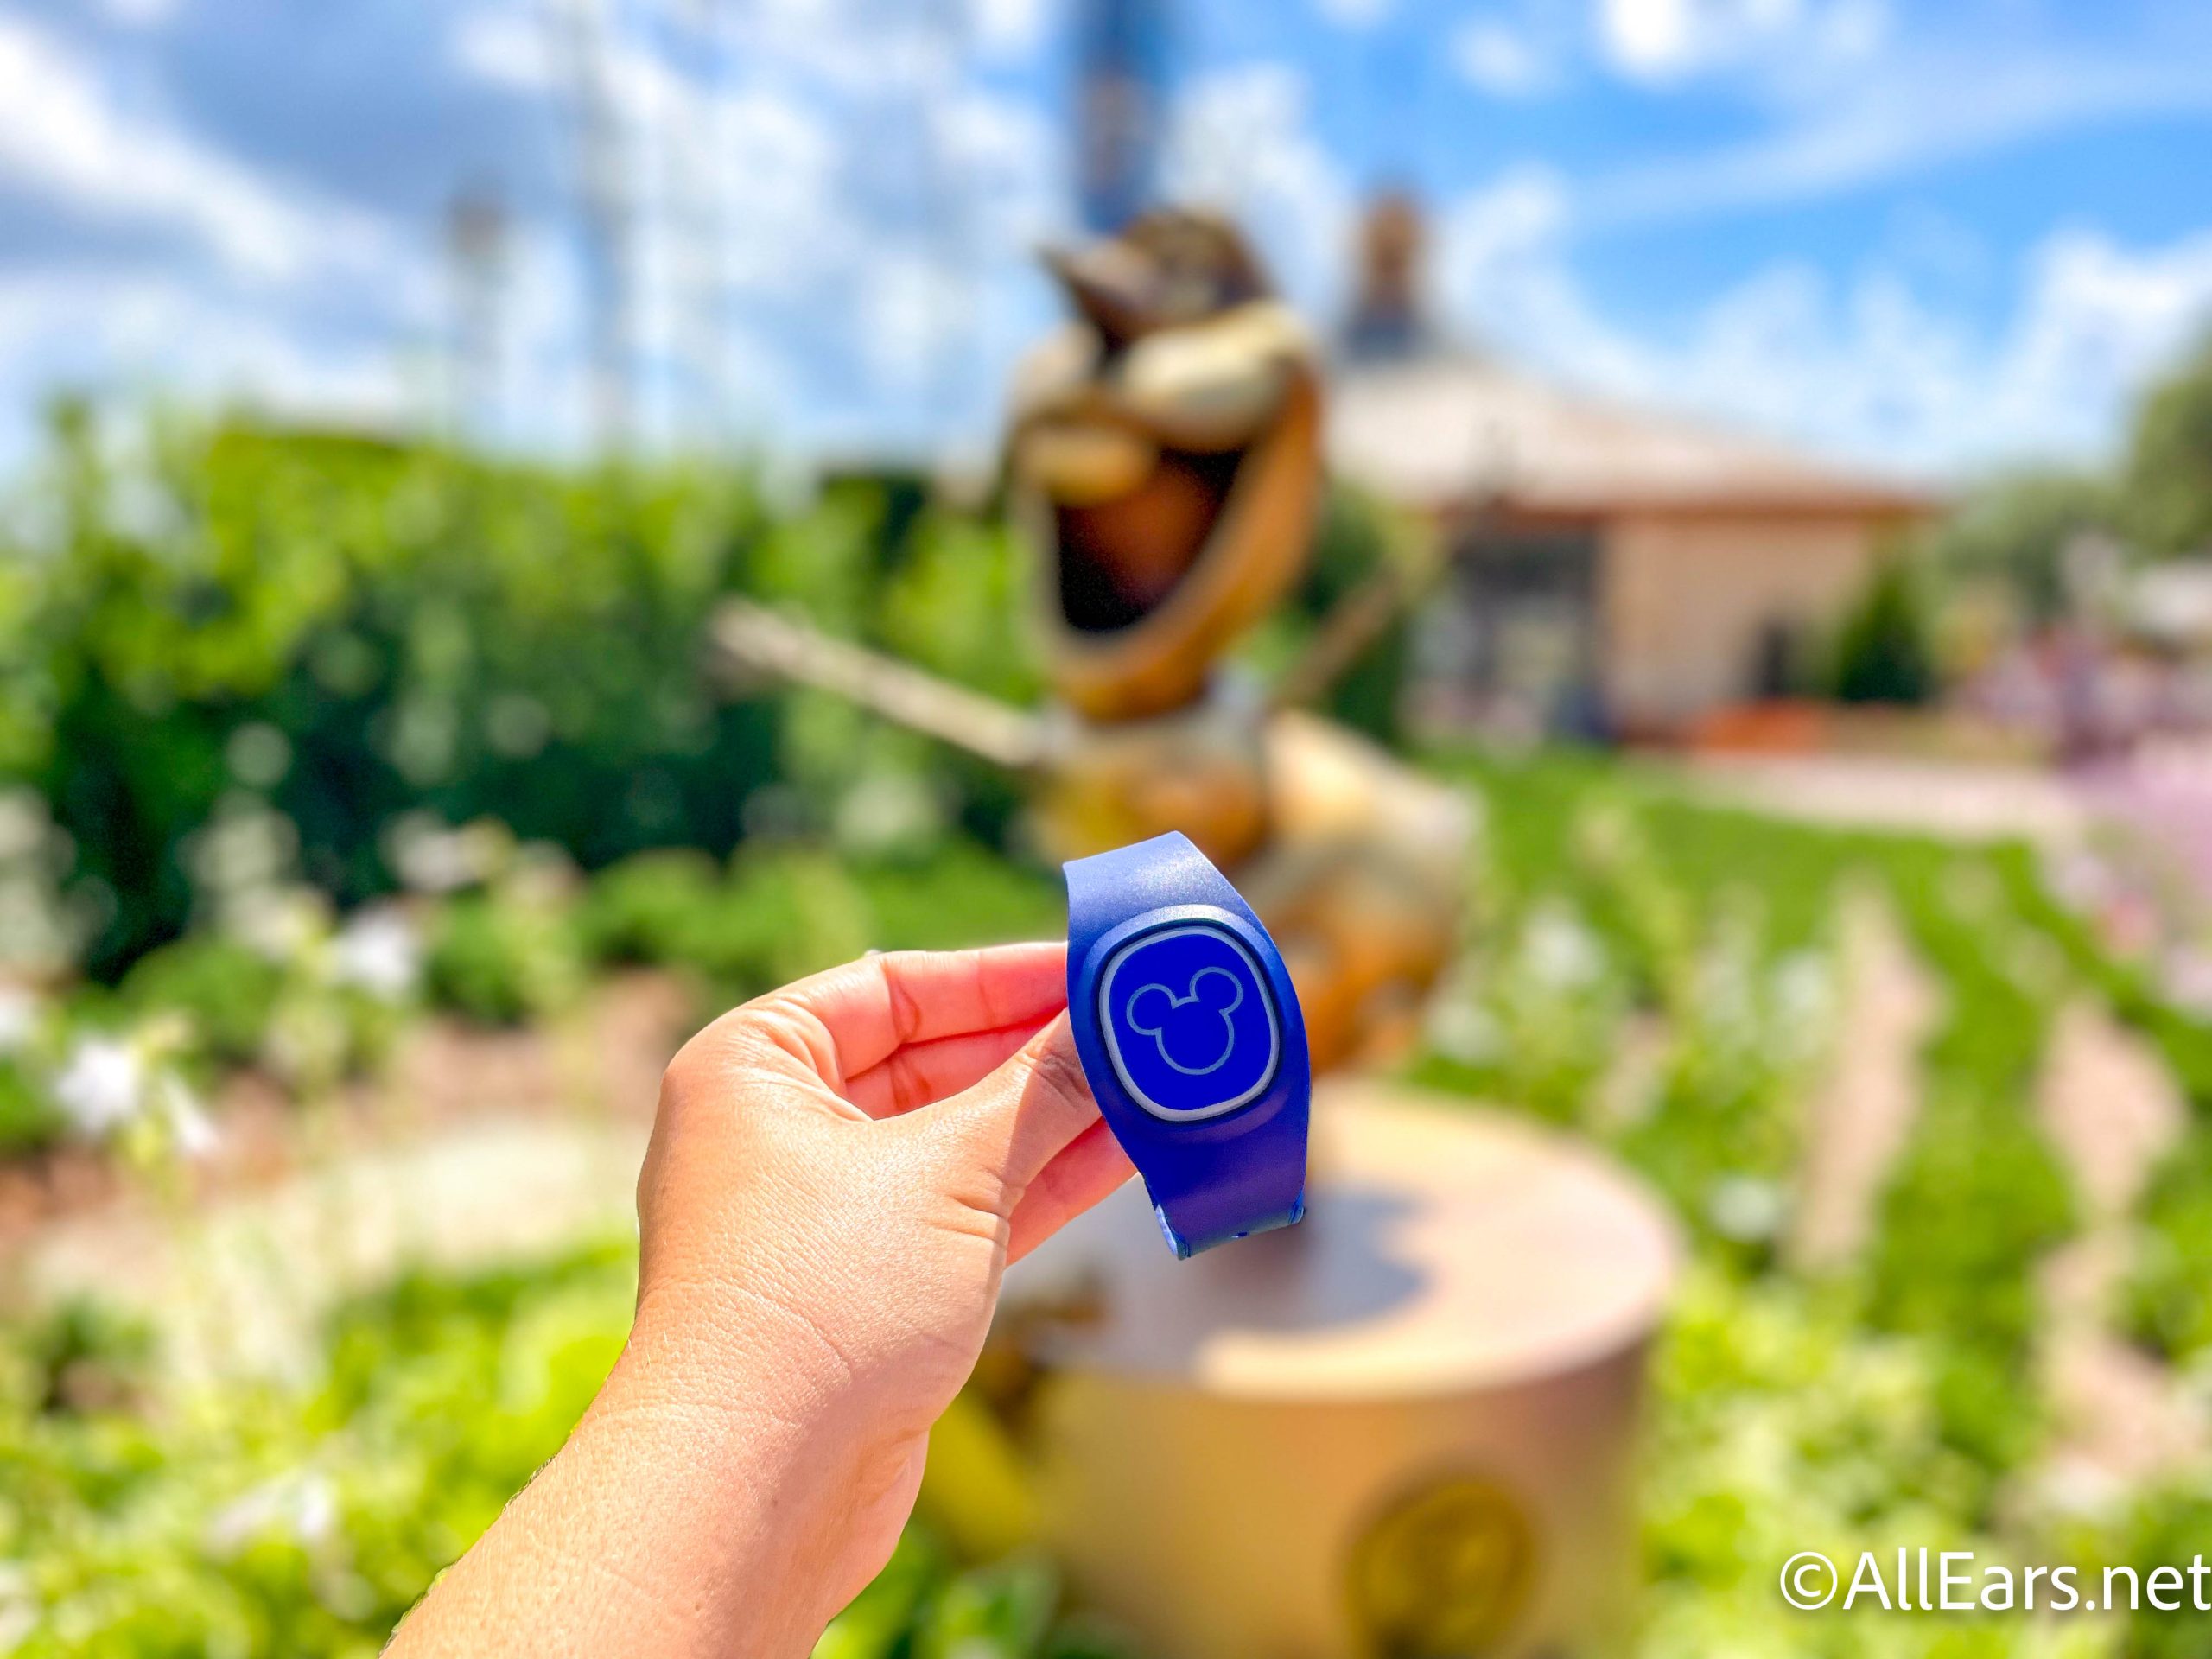 MagicBand+ Debuts July 27 at Disney World — Here's What We Know!